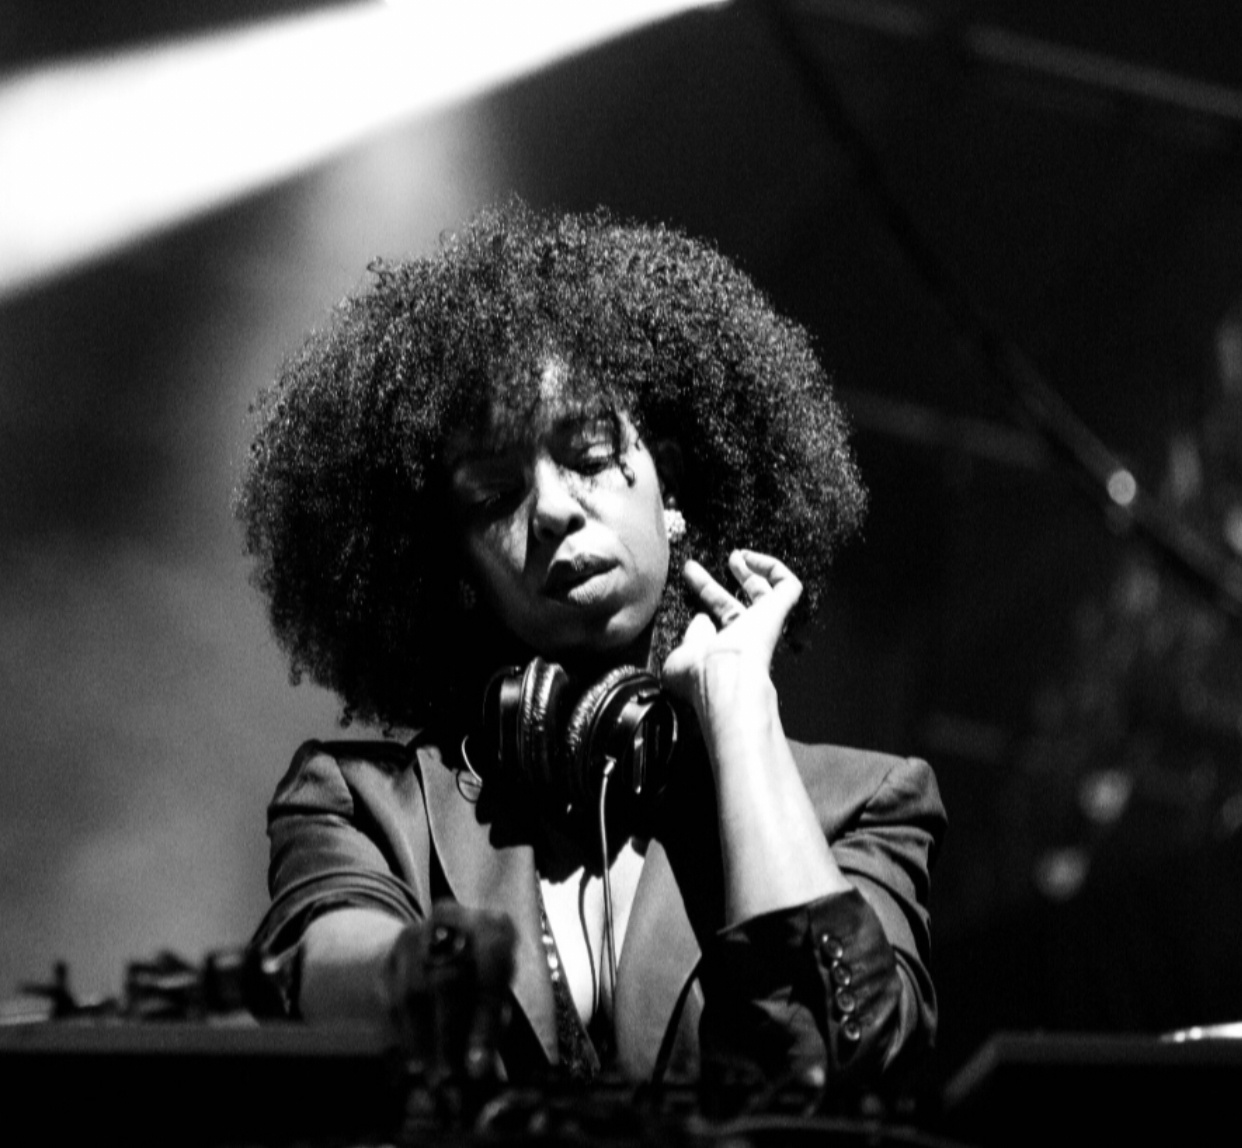 A black-and-white portait of DJ Reborn at a turntable. She is a Black woman wearing a jacket with lapels and holds a a pair of headphones around her neck with one hand.